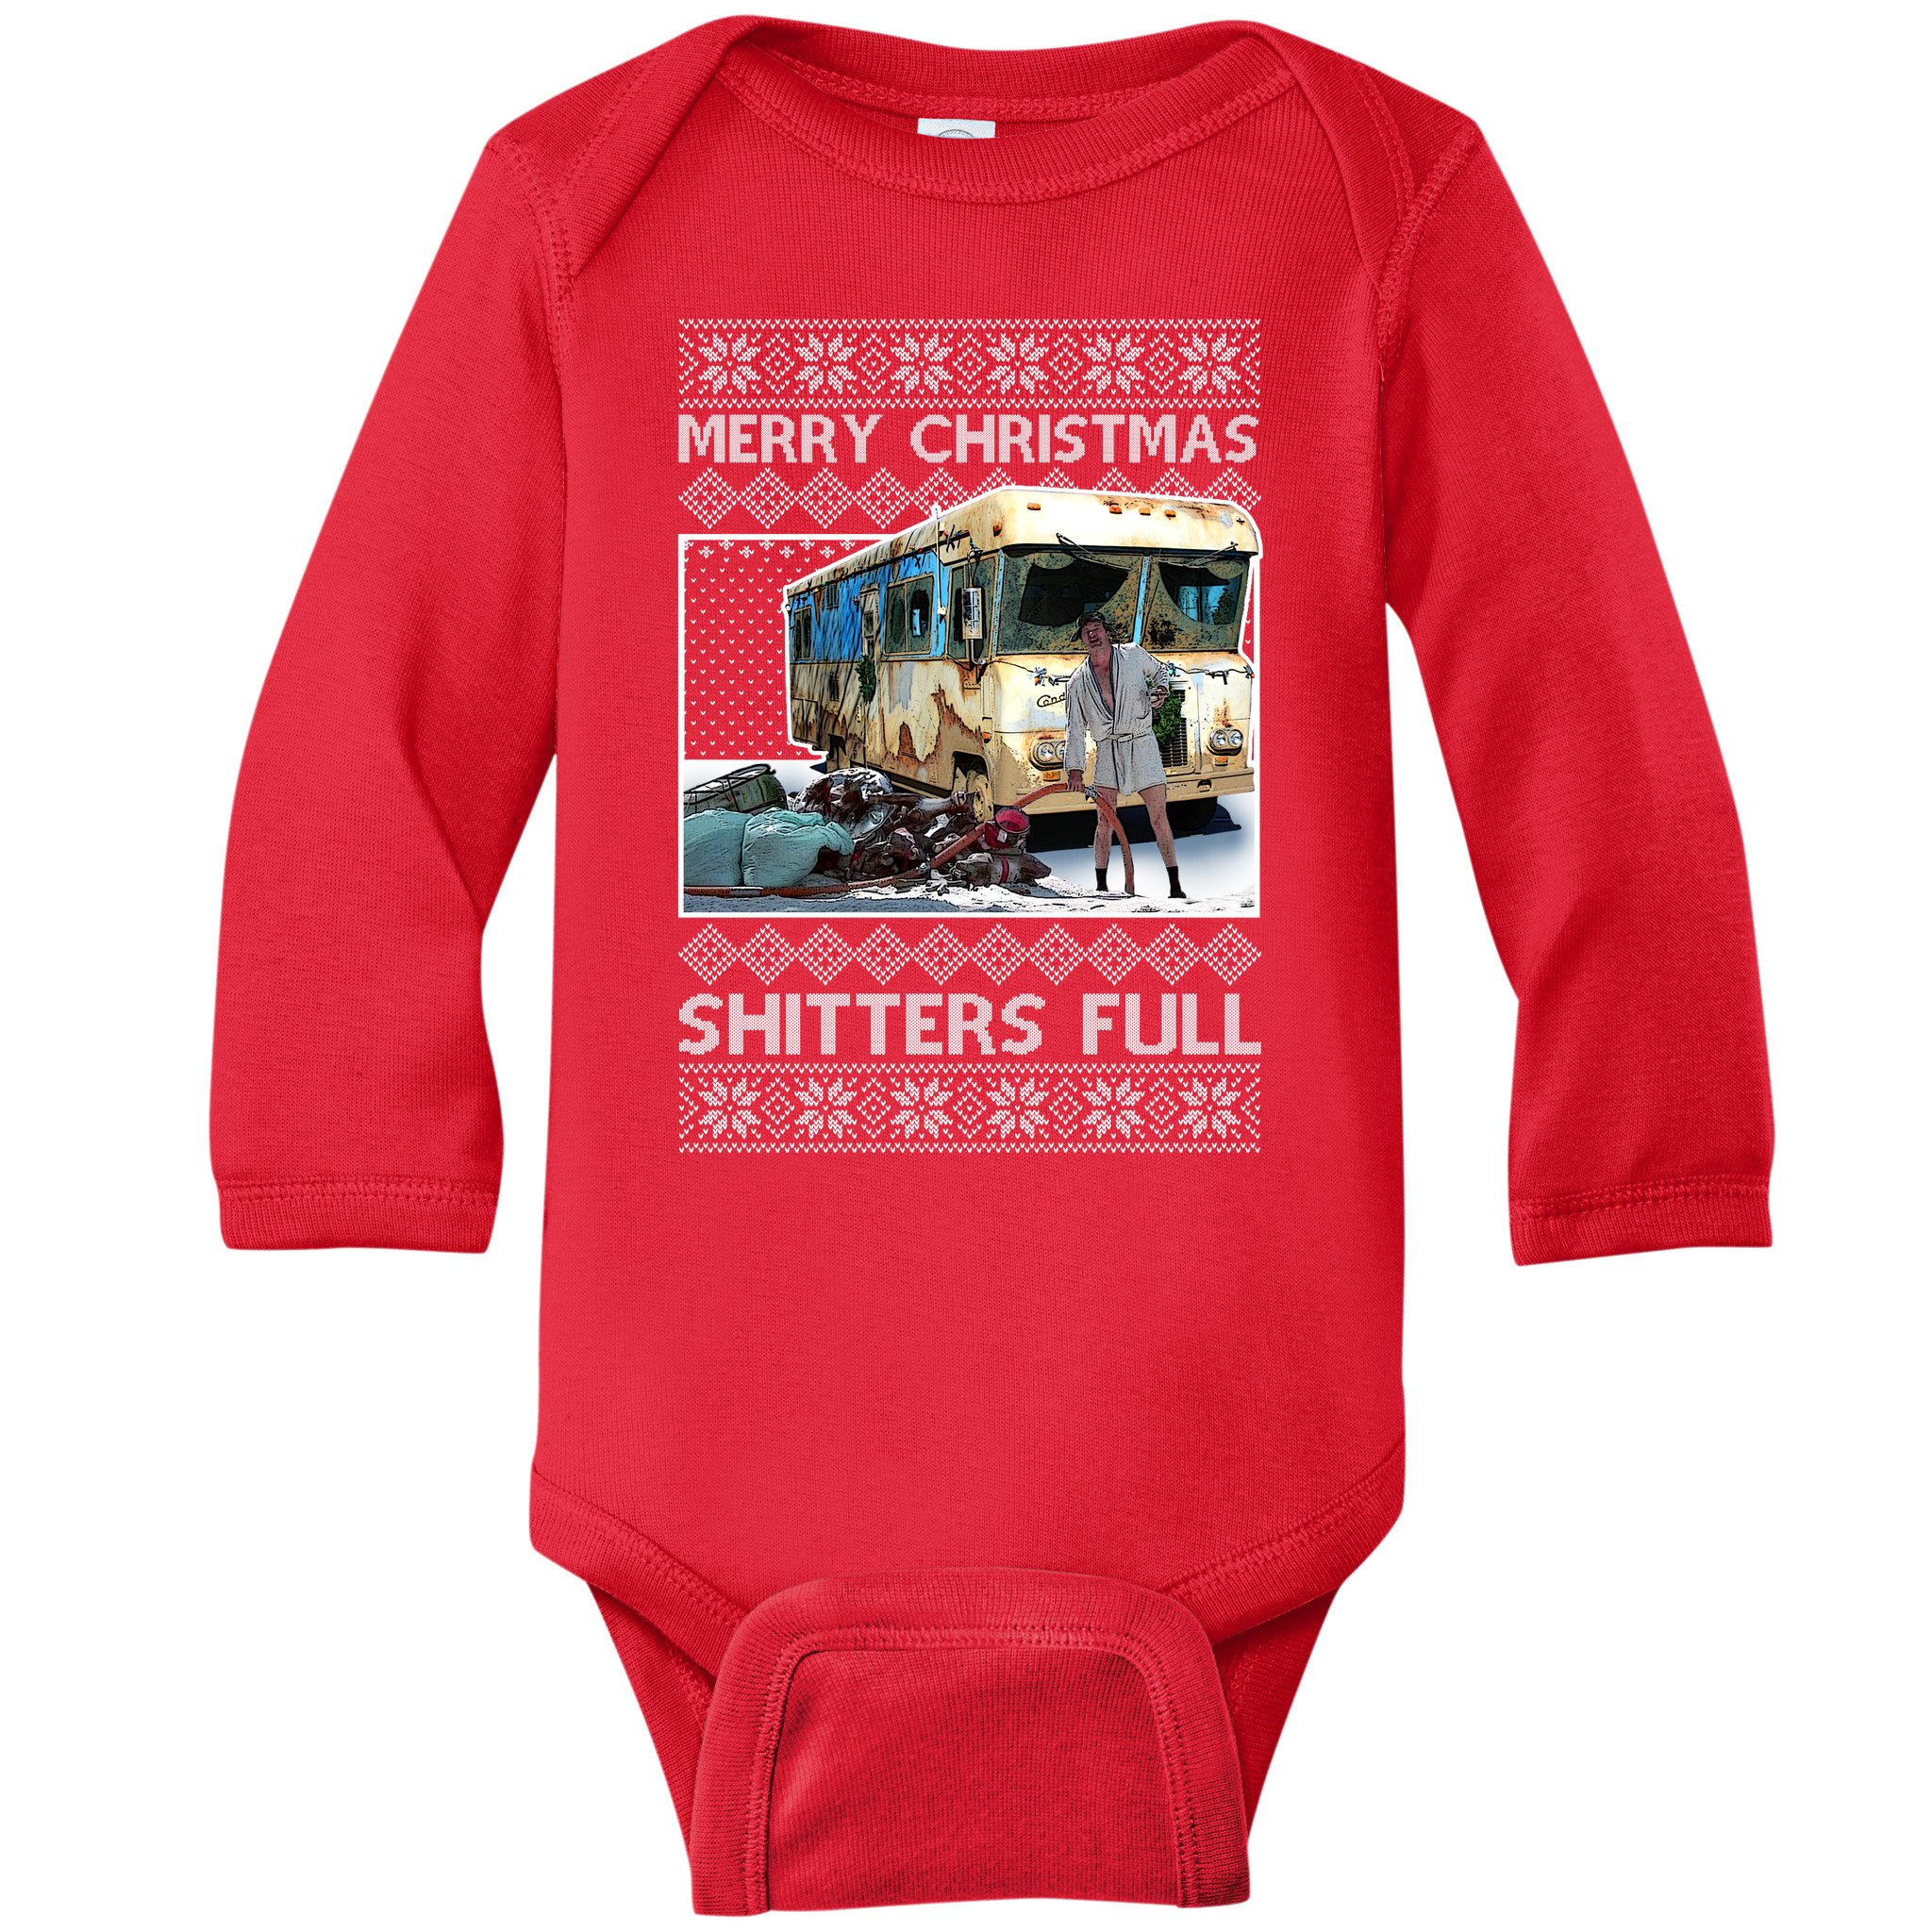 Merry Christmas Shitters Full Funny Baby Bodysuit Funny Baby Clothes 